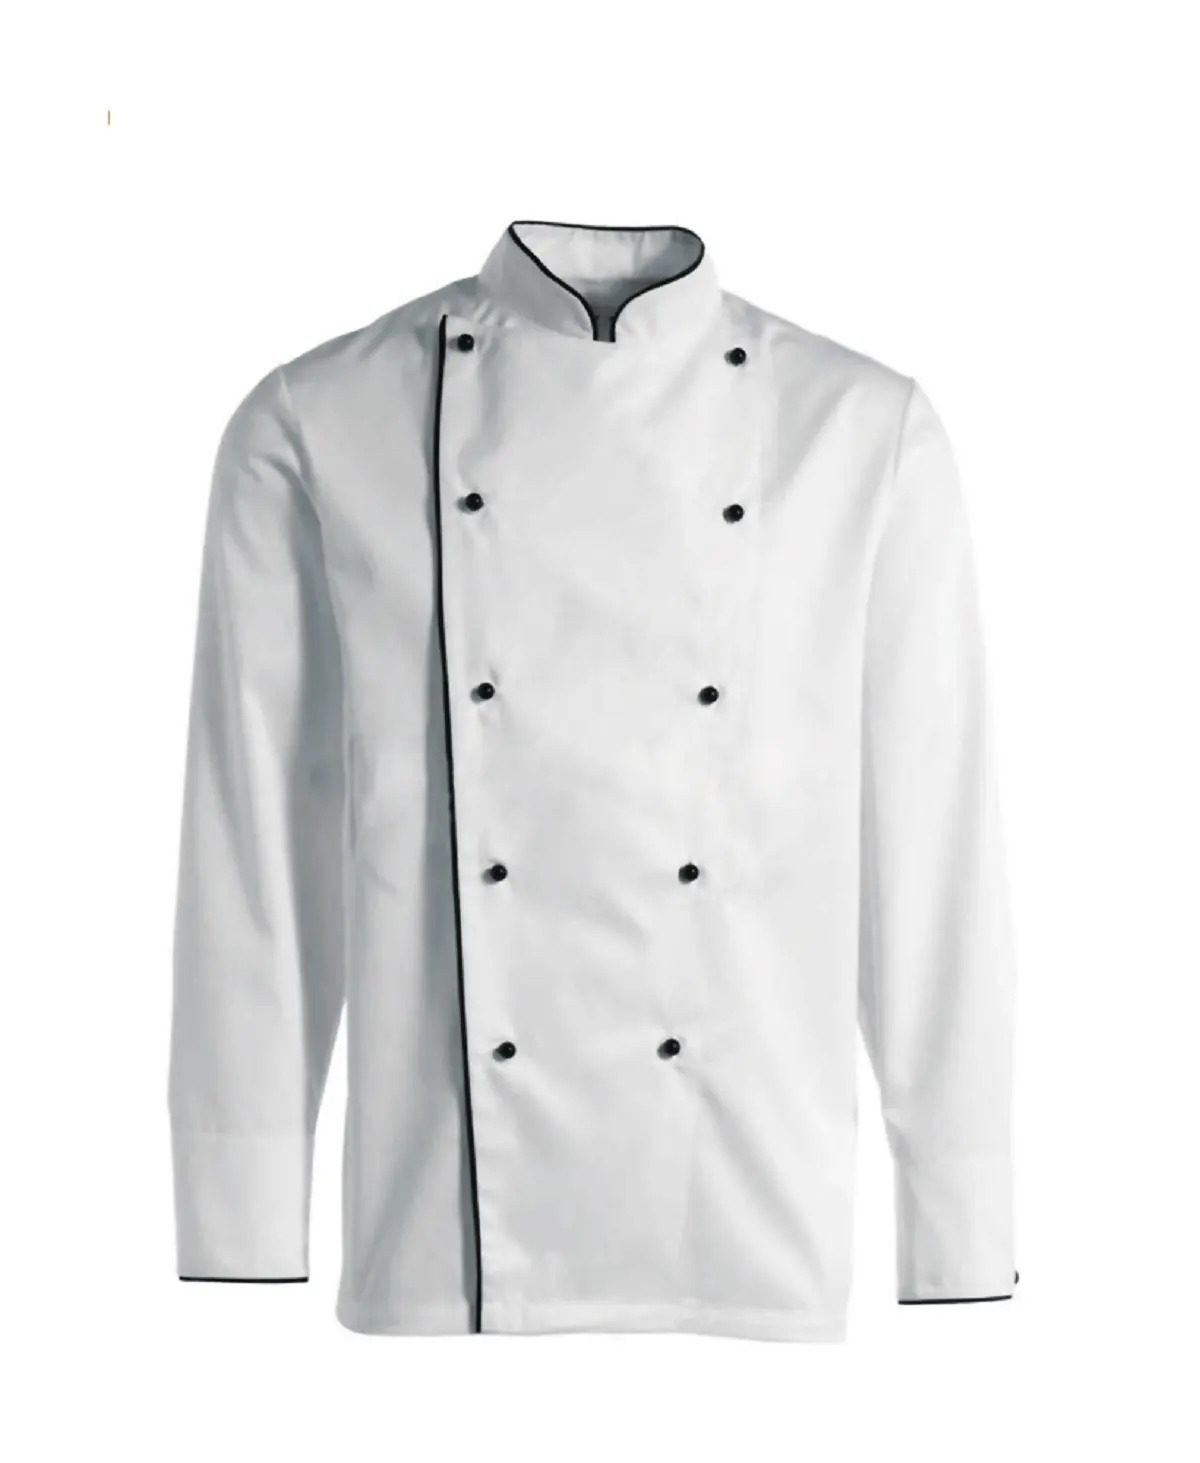 high quality canvas cotton made white chef coat for unisex hotel restaurant uniform with customise size colored and design